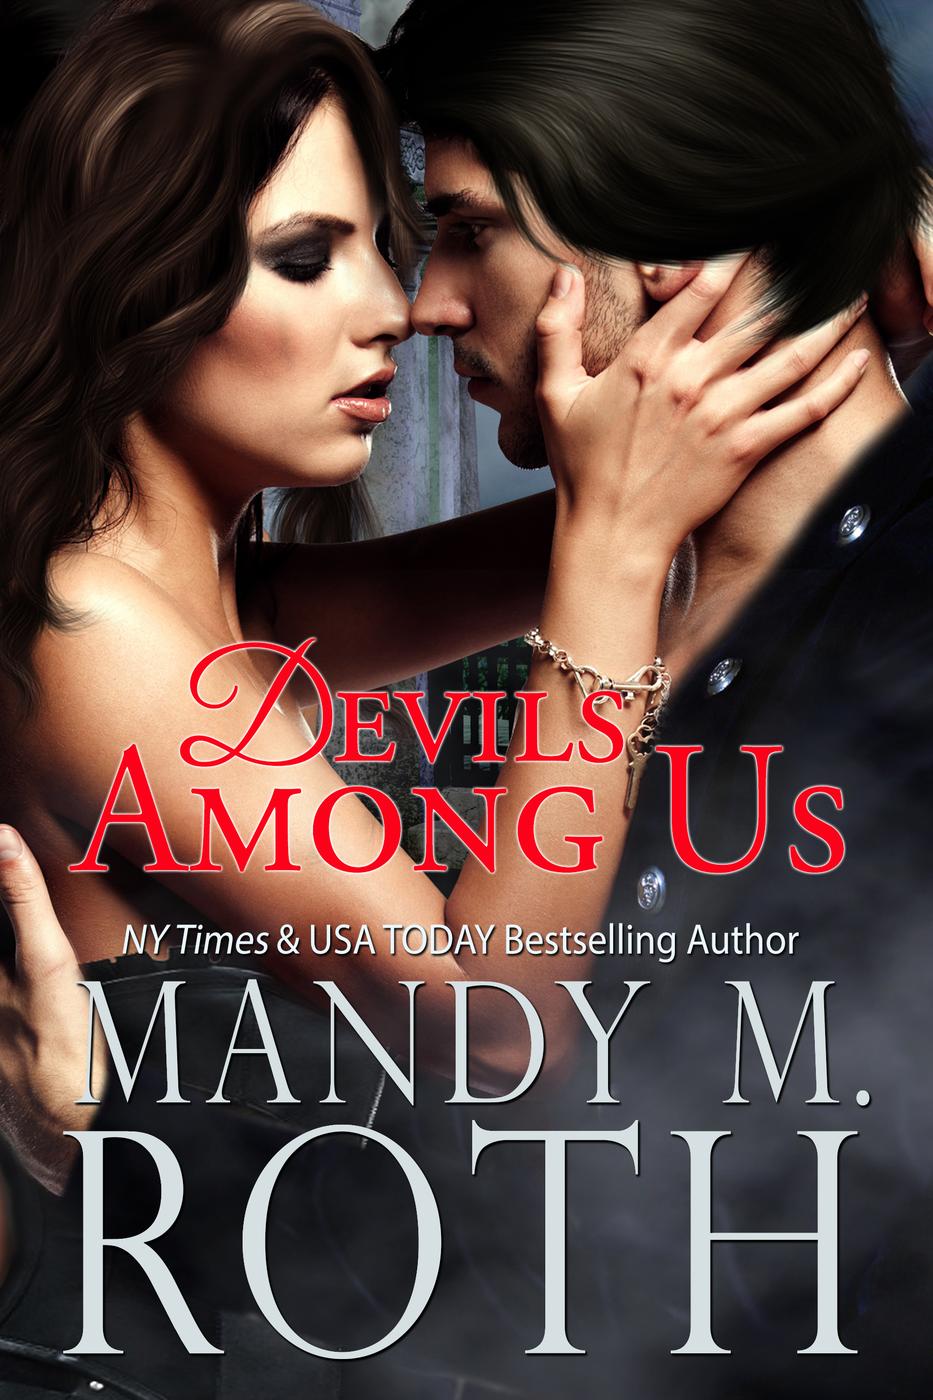 Devils Among Us by Mandy M. Roth